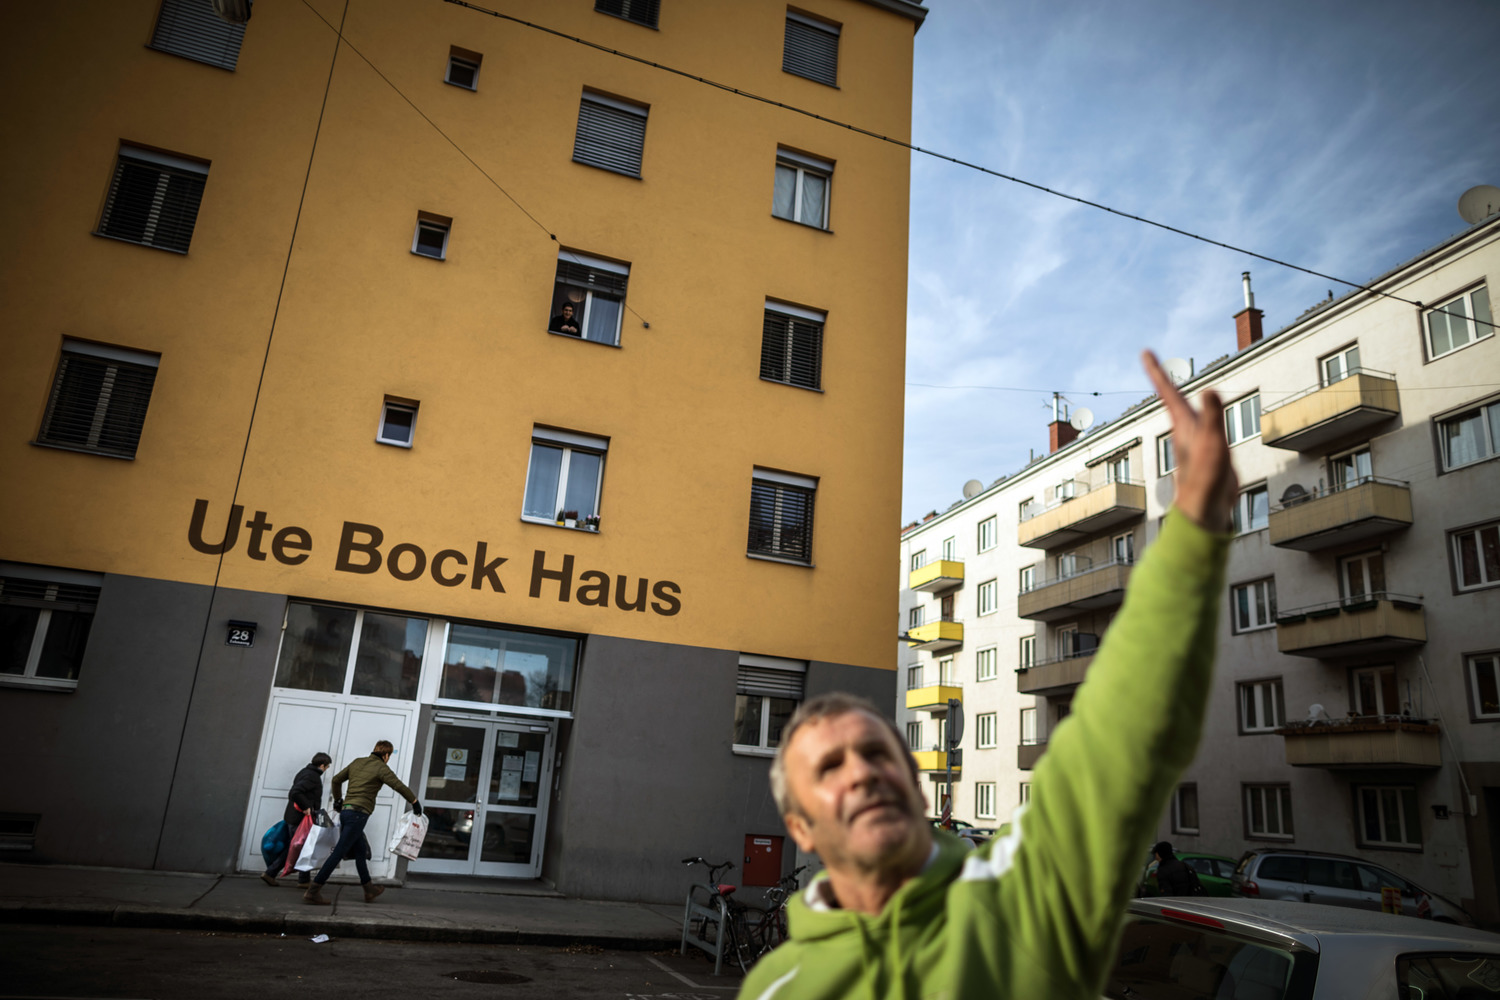 Austria. Refugee shelter founded in private initiative by a Austrian philanthropist Ute Bock